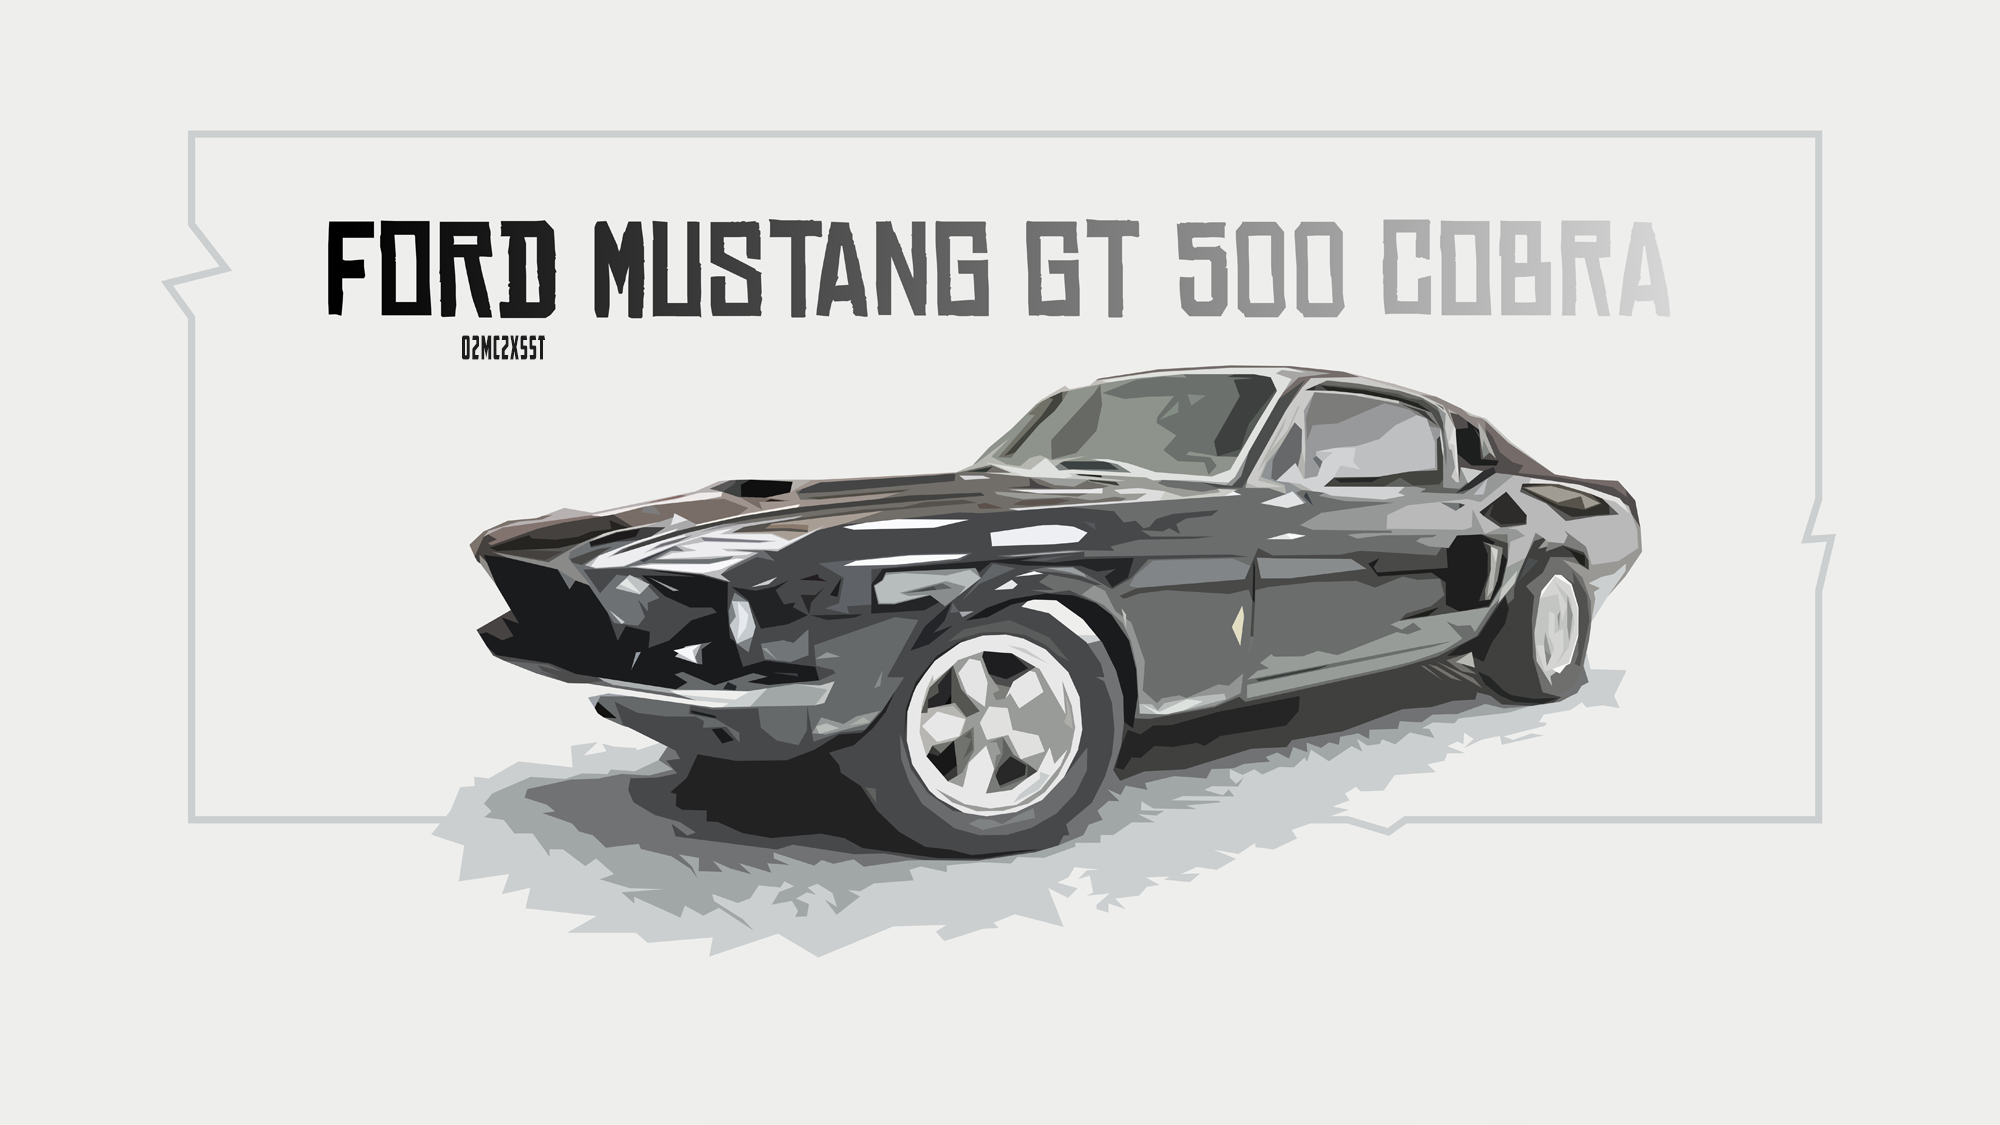 vehicles, ford mustang gt500, black & white, car, ford mustang, ford, muscle car